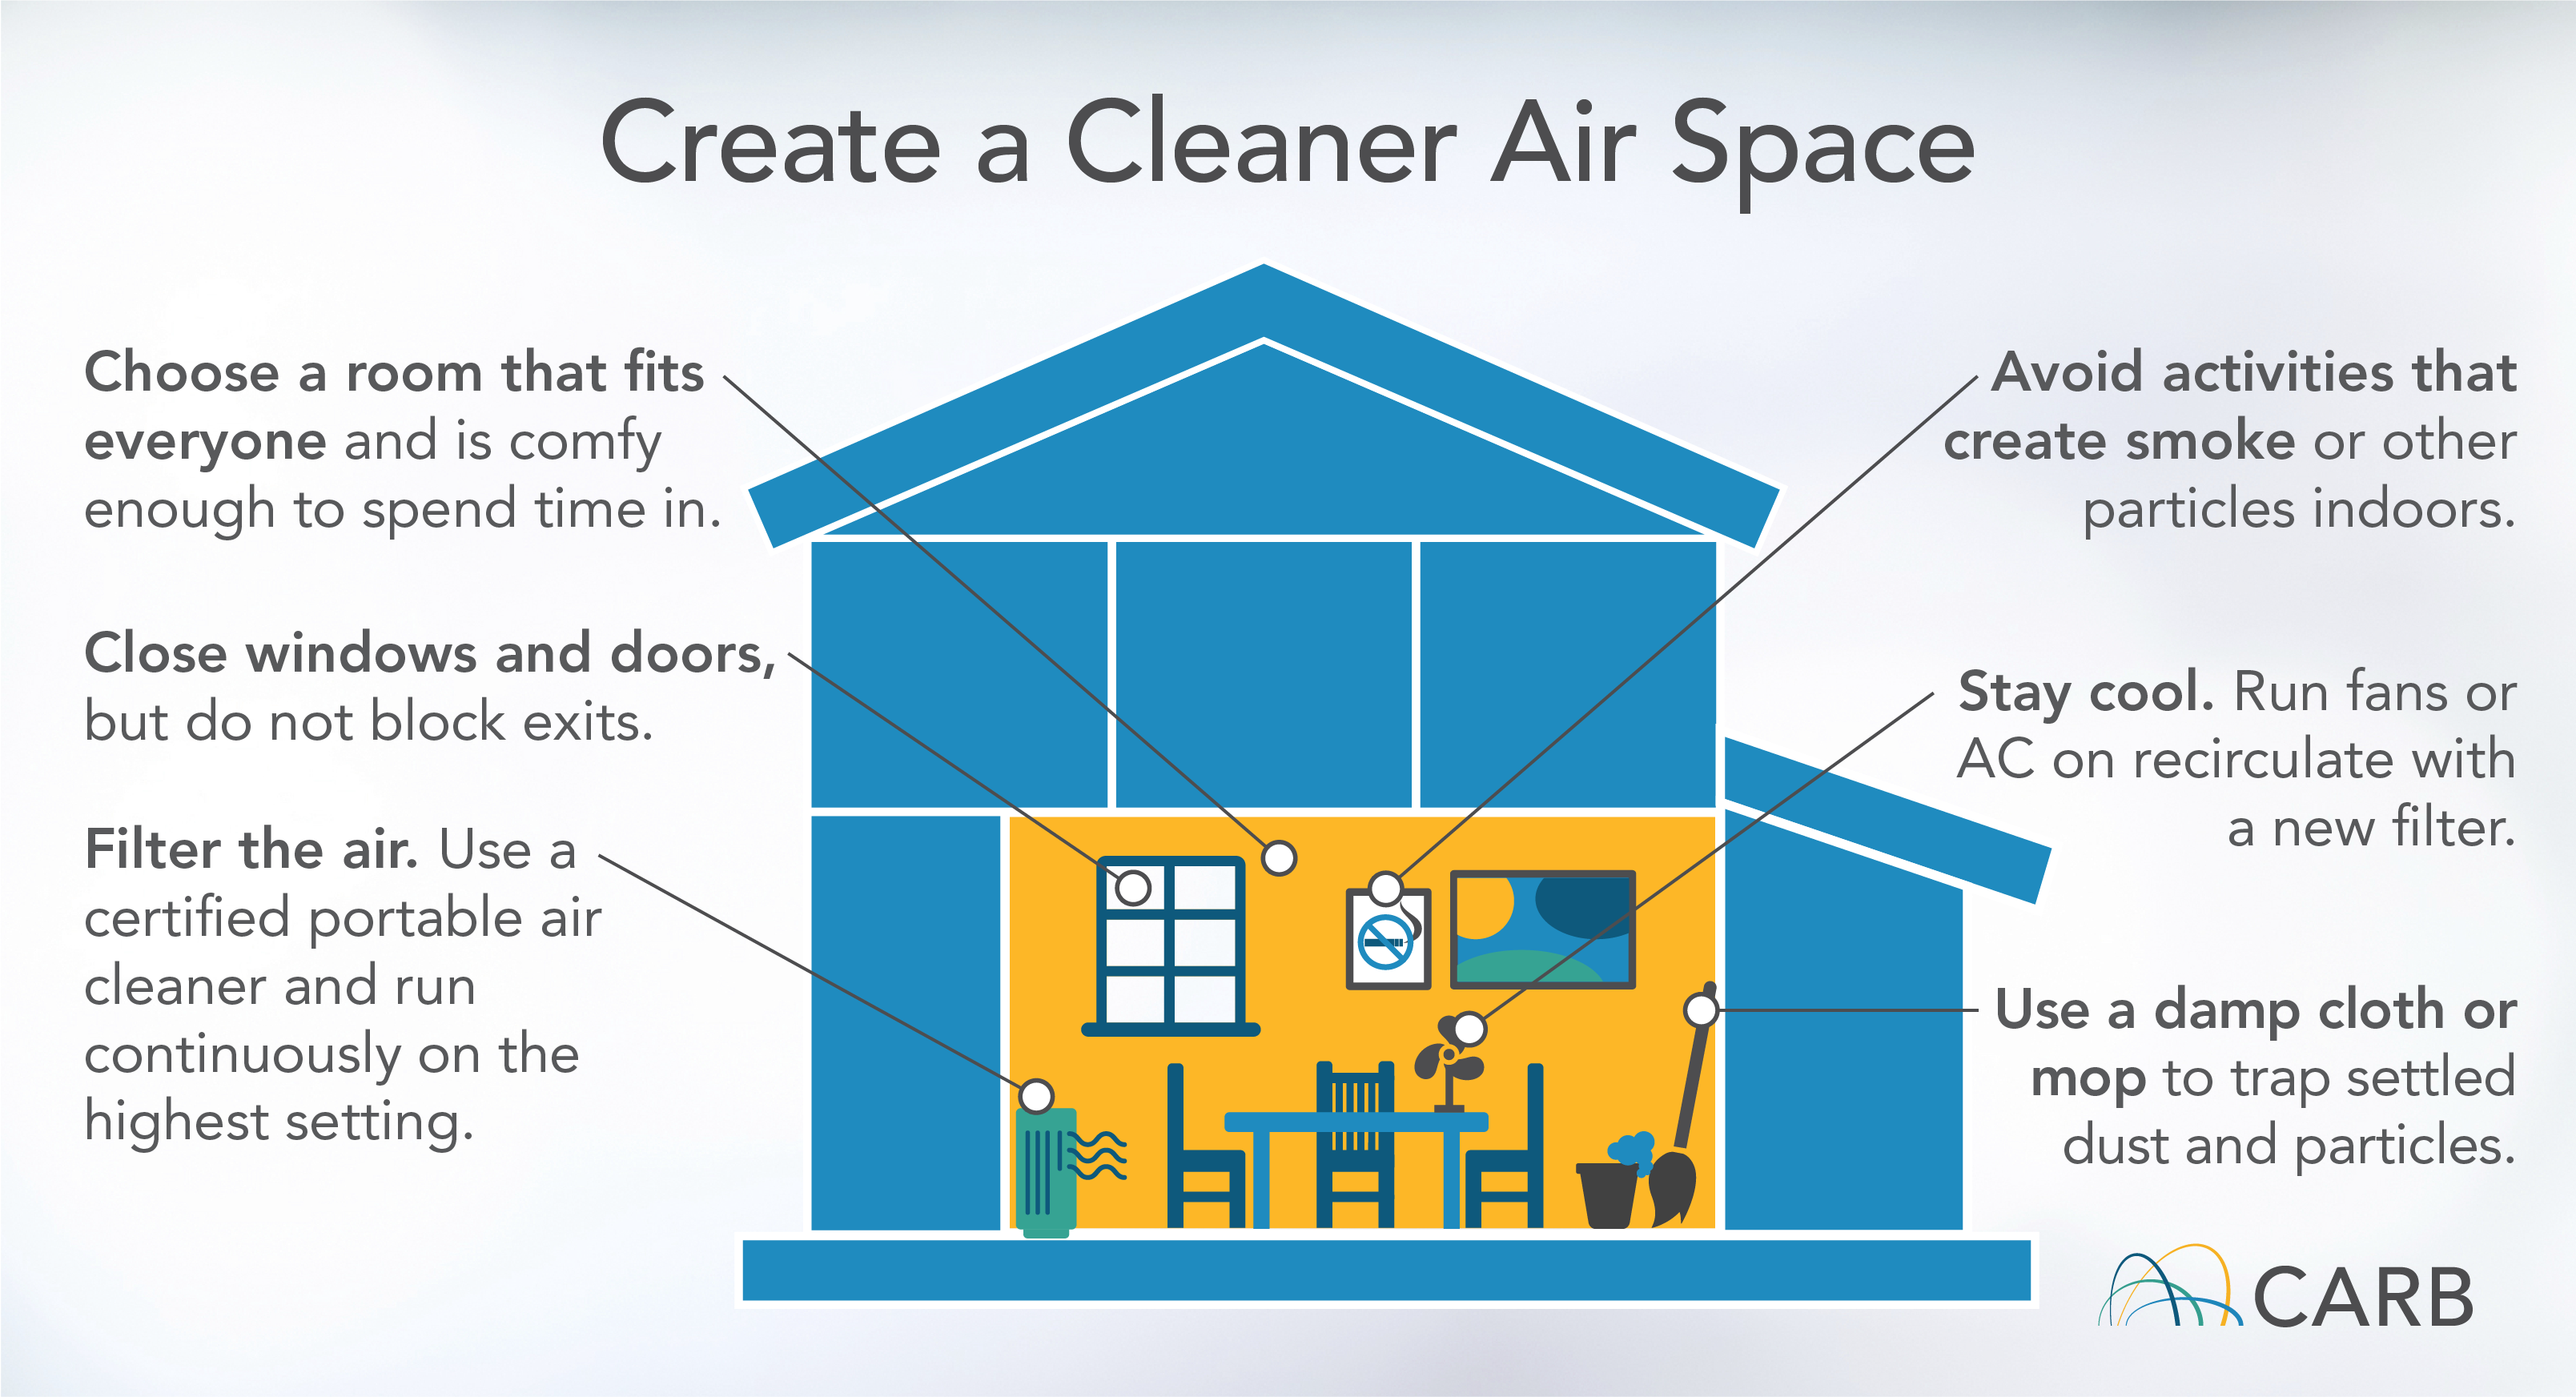 Create a Cleaner Air Space: Choose a room that fits everyone and is comfy enough to spend time in. Close windows and doors, but do not block exits. Filter the air. Use a certified portable air cleaner and run continuously on the highest setting. Avoid activities that create smoke or other particles indoors. Stay cool. Run fans or AC on recirculate with a new filter. Use a damp cloth or mop to trap settled dust and particles.